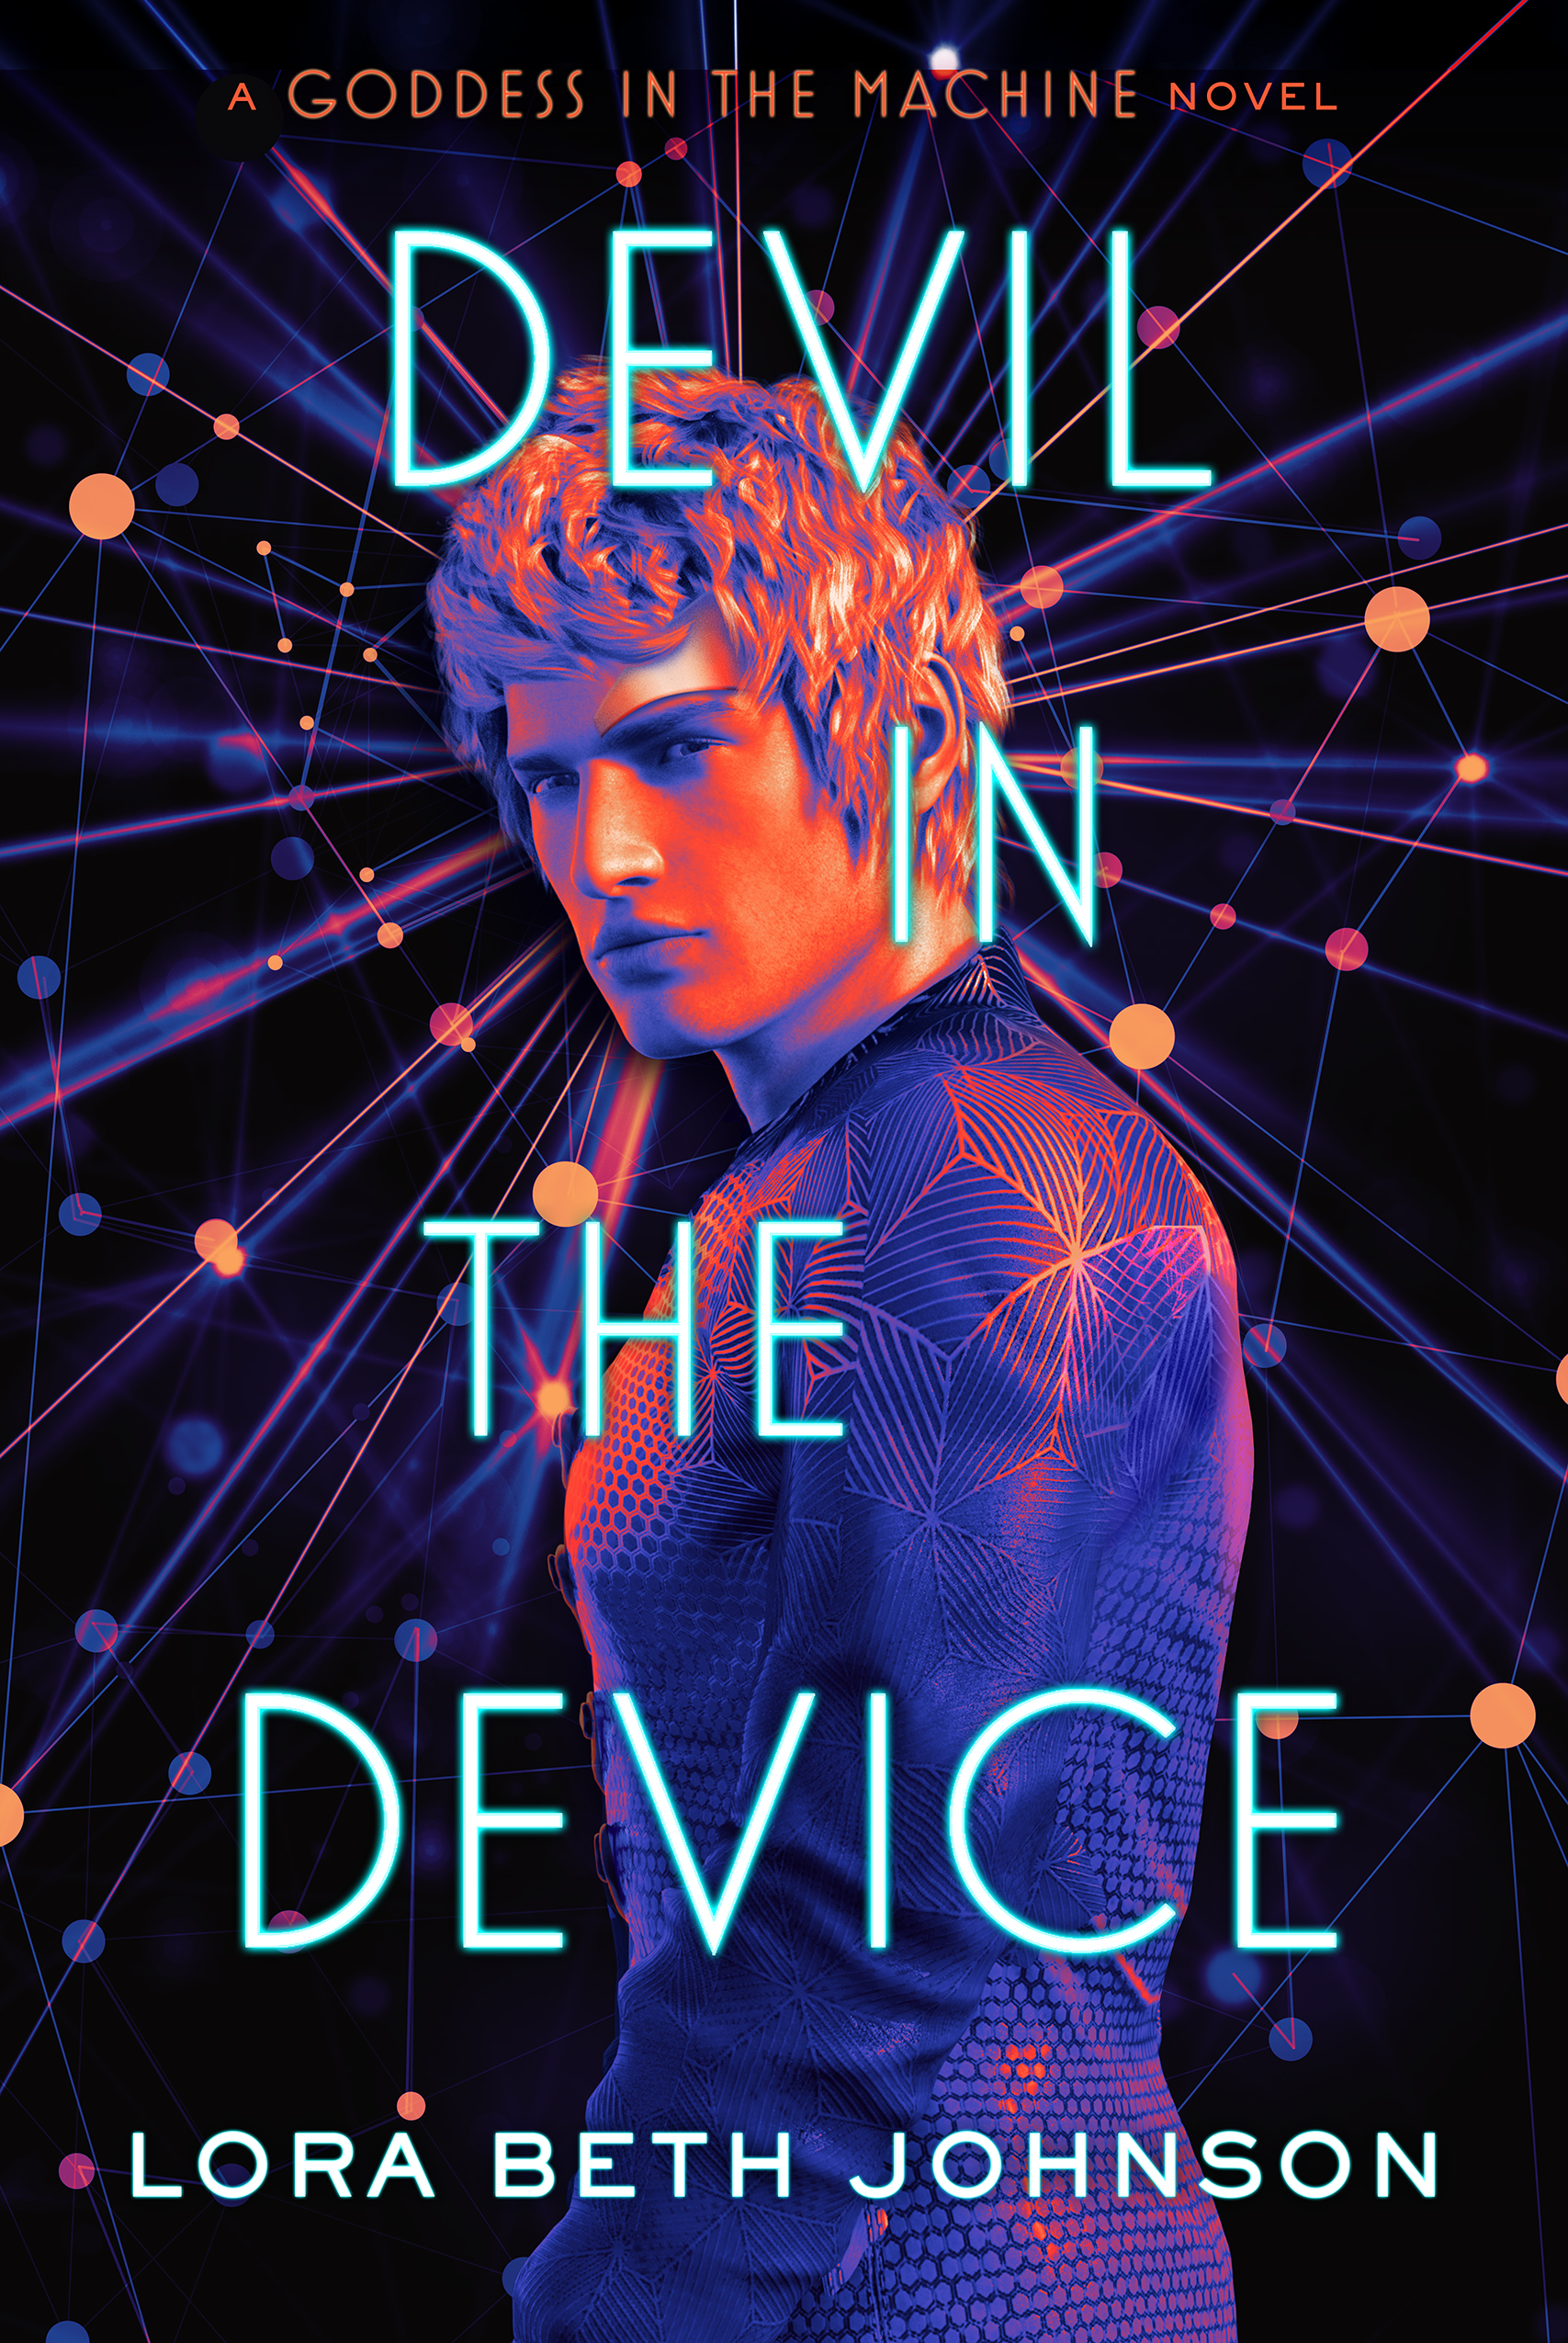 Devil in the Device by Lora Beth Johnson